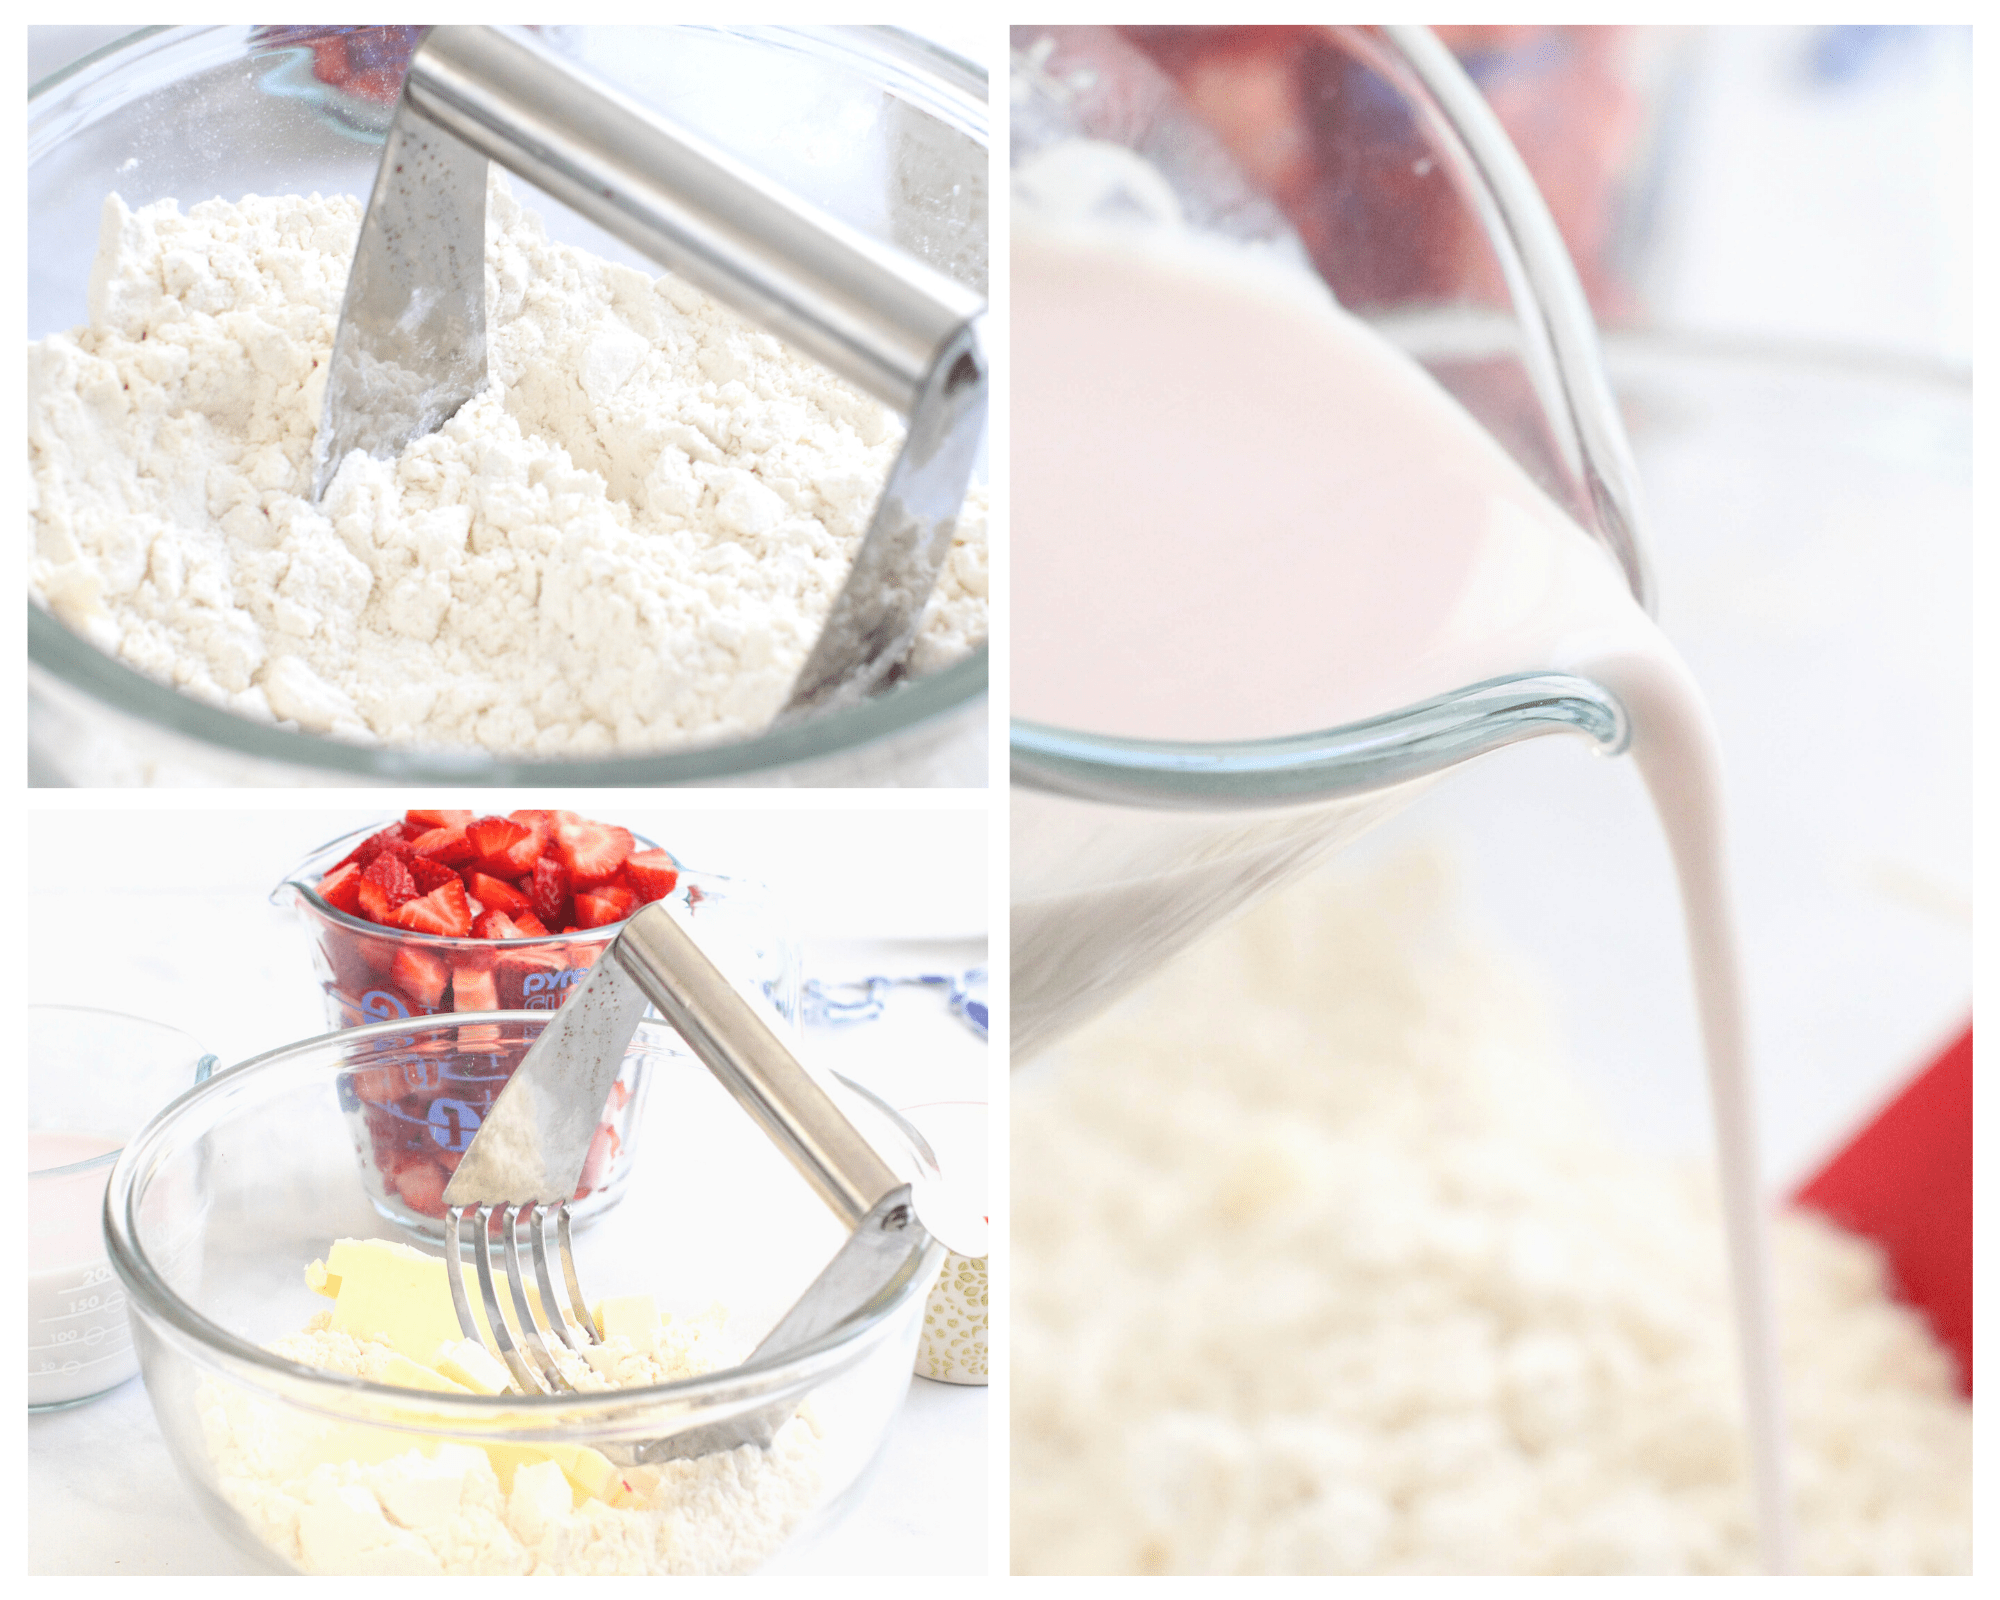 Making the muffin batter for Strawberry Muffins - recipe at at DearCreatives.com 